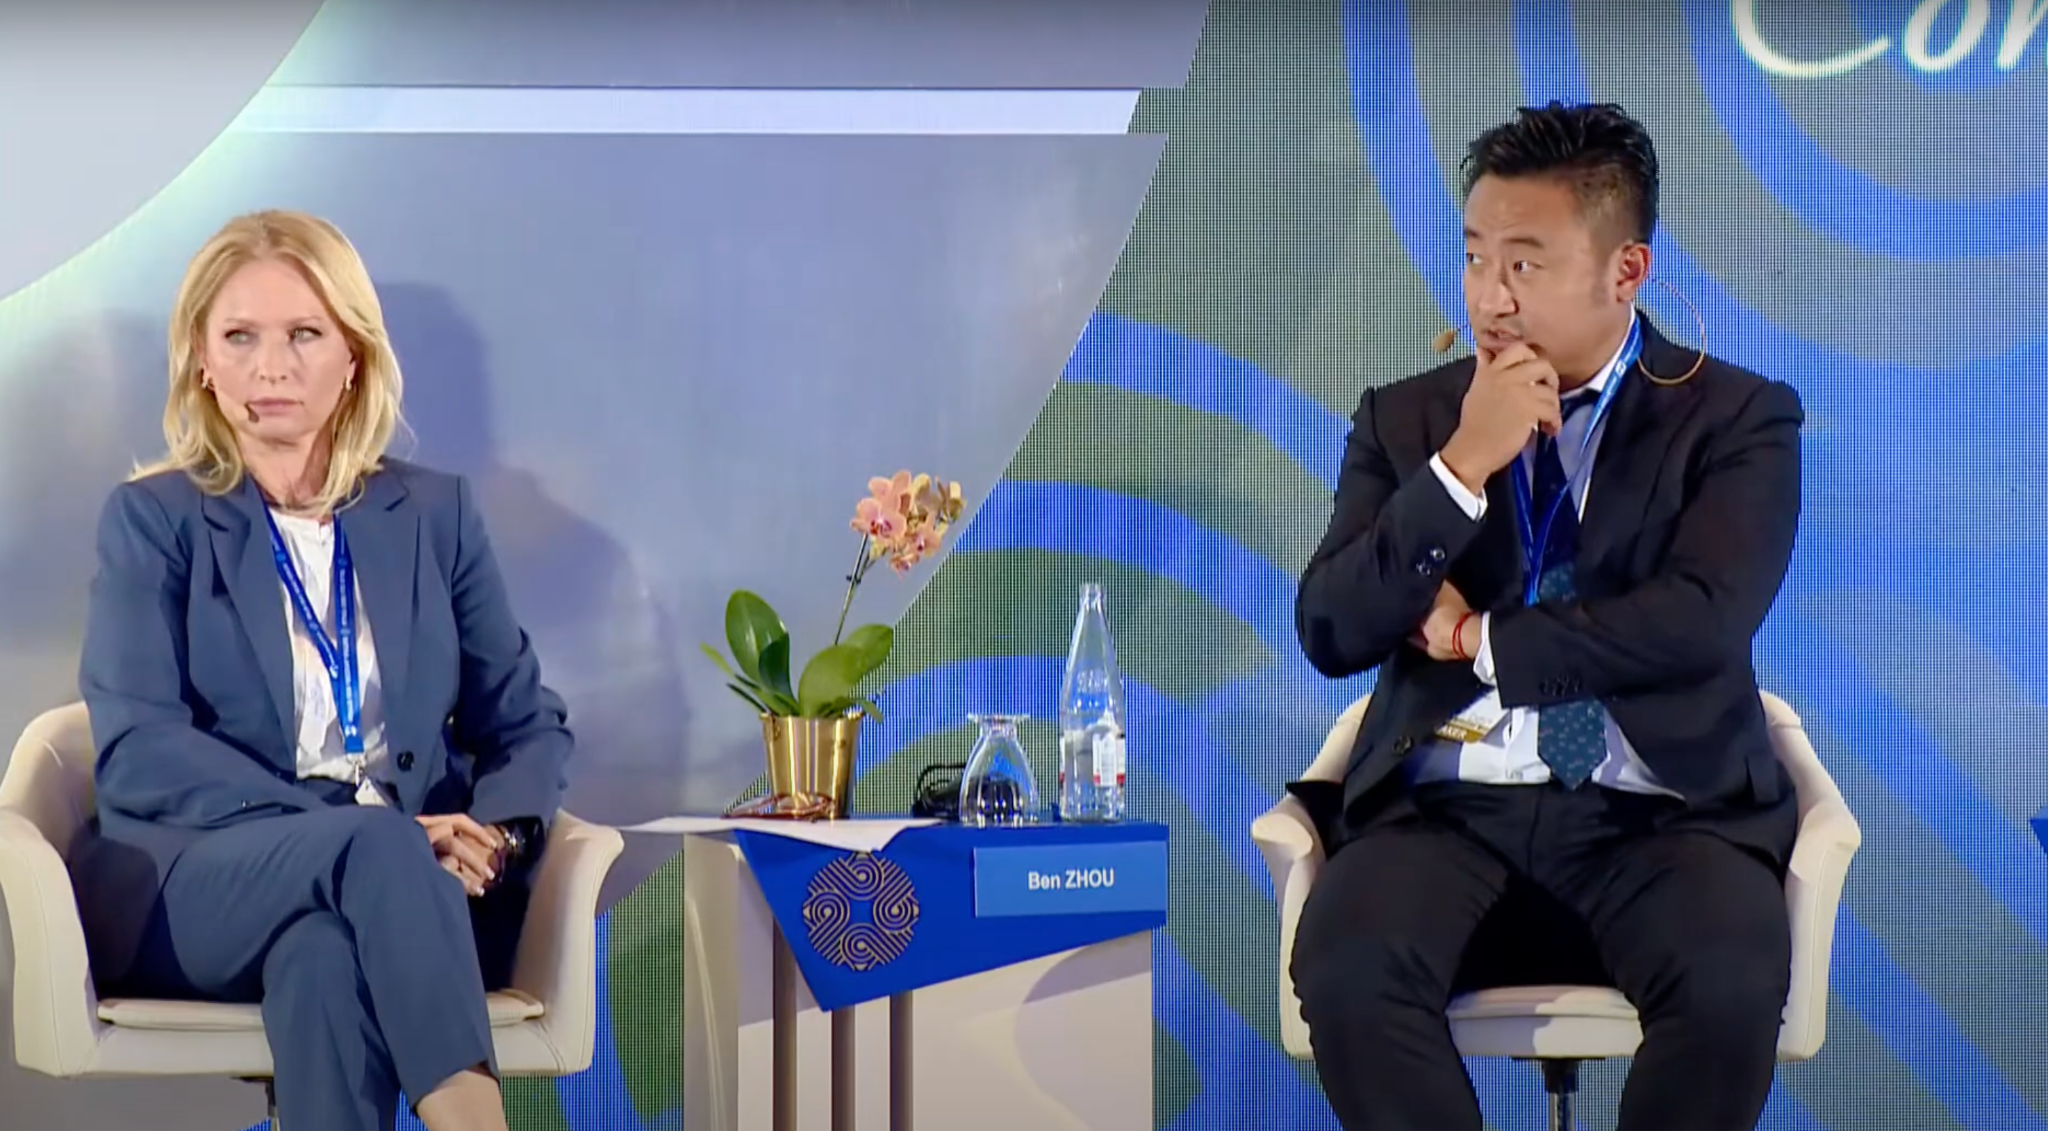 Picture 2: Ben Zhou, Co-founder and CEO of Bybit shared his insights on the future of fintech and cryptocurrency at the 4th Tbilisi Silk Road Forum